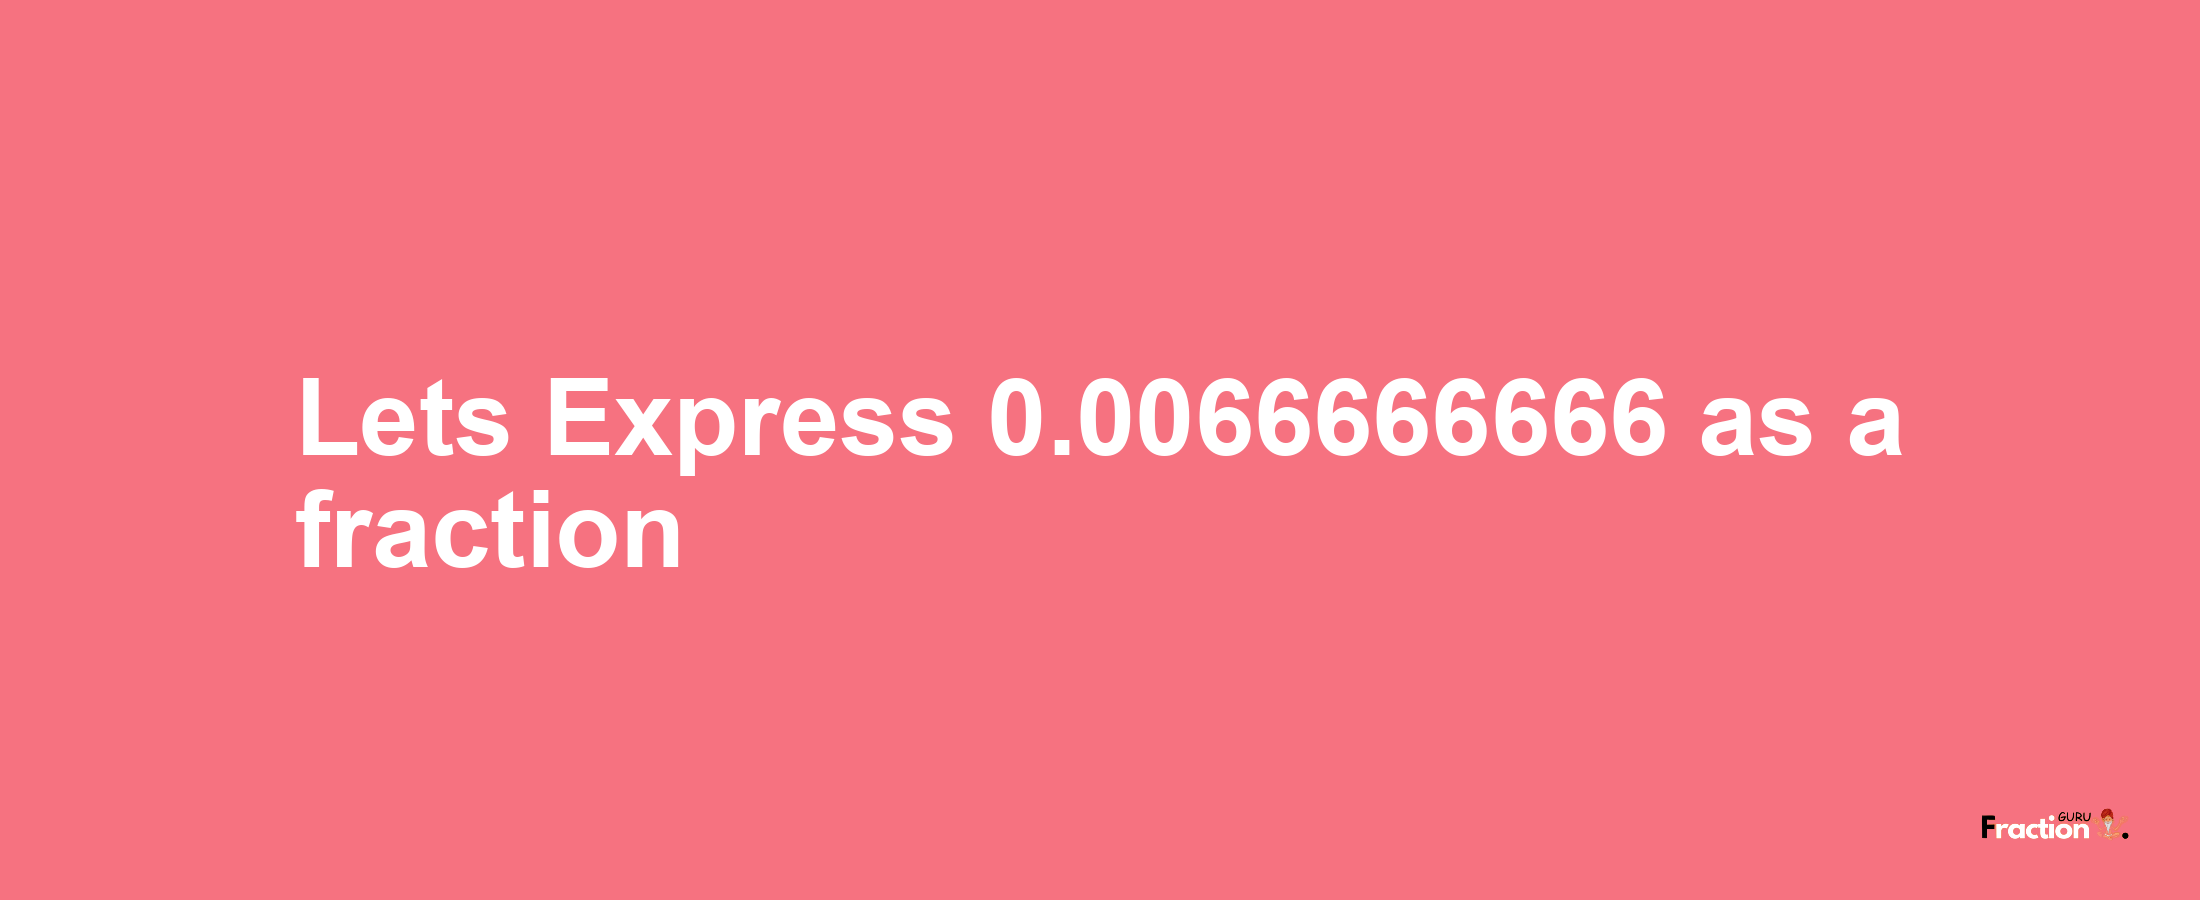 Lets Express 0.0066666666 as afraction